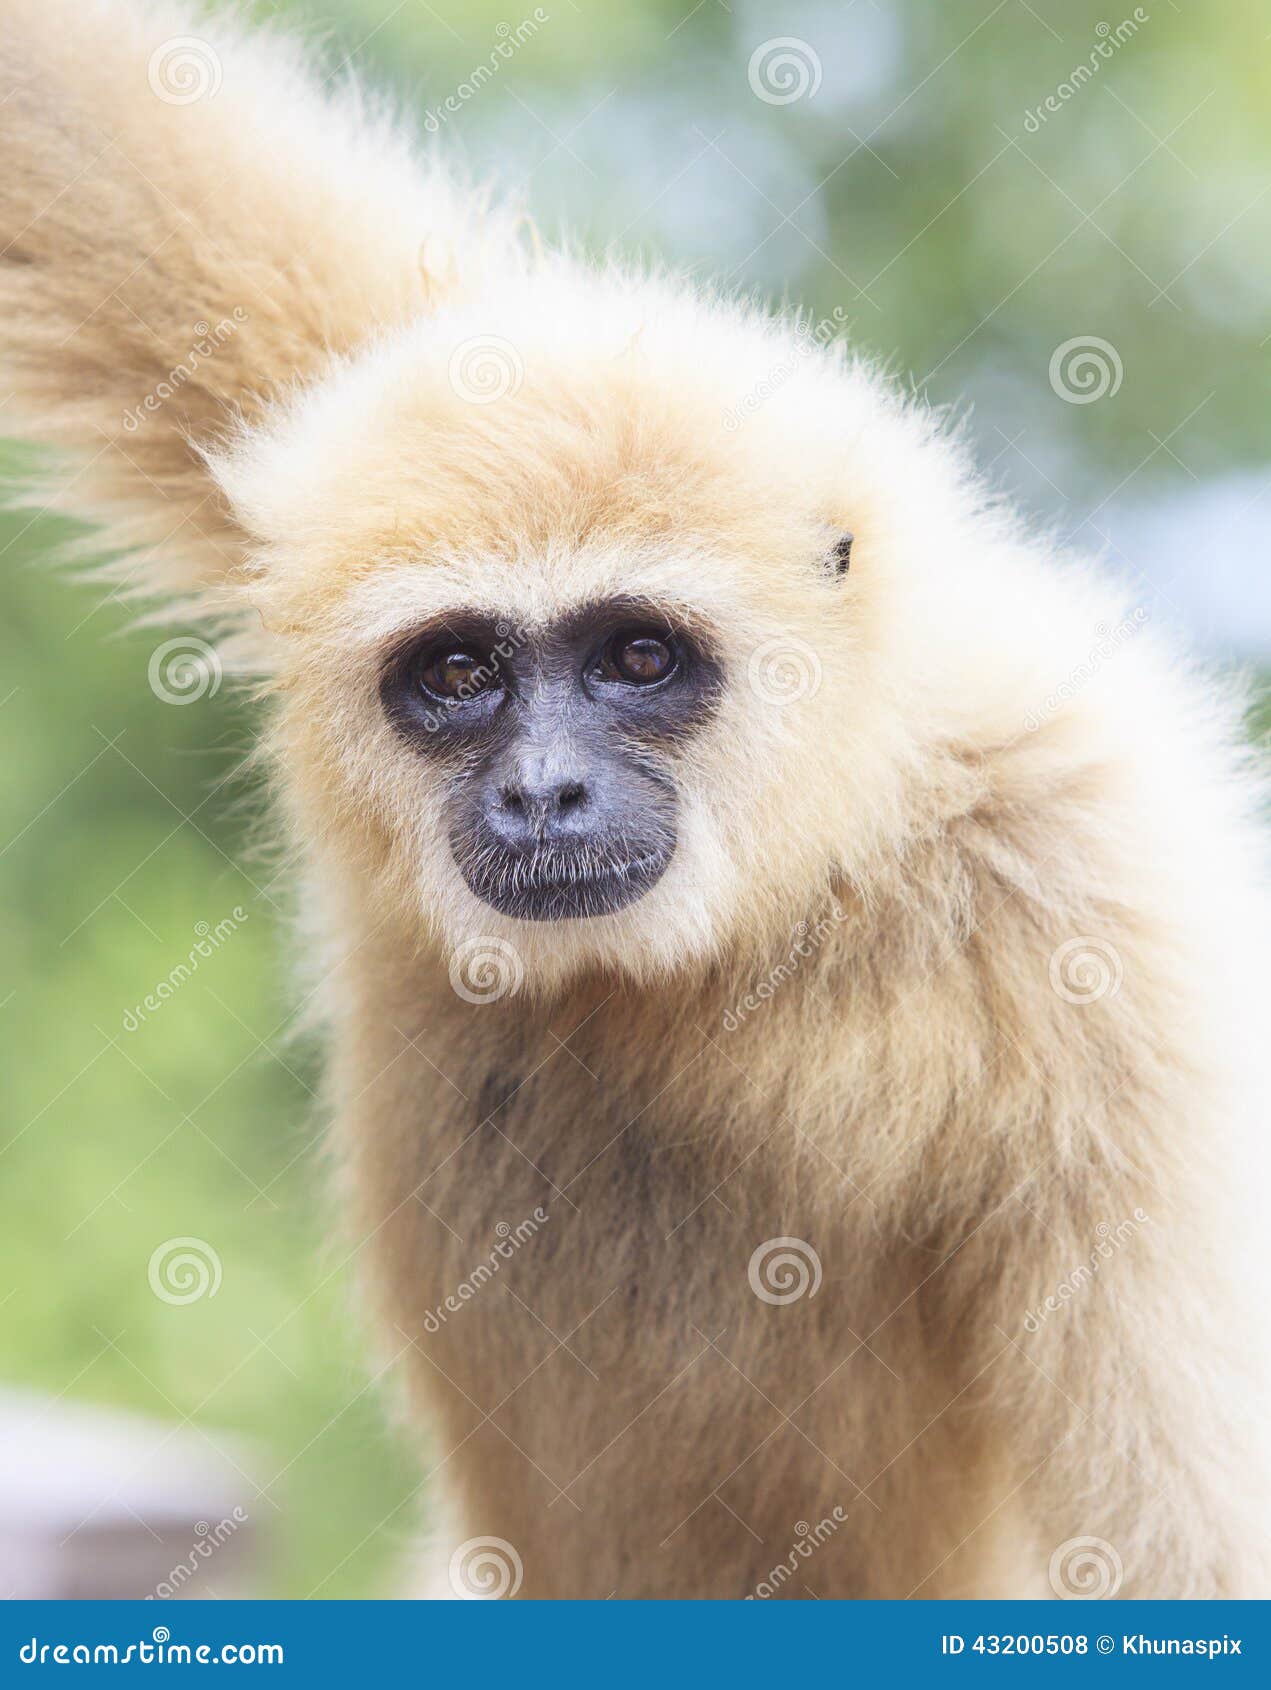 close up face of white cheeked ,white hand gibbon or lar gibbon